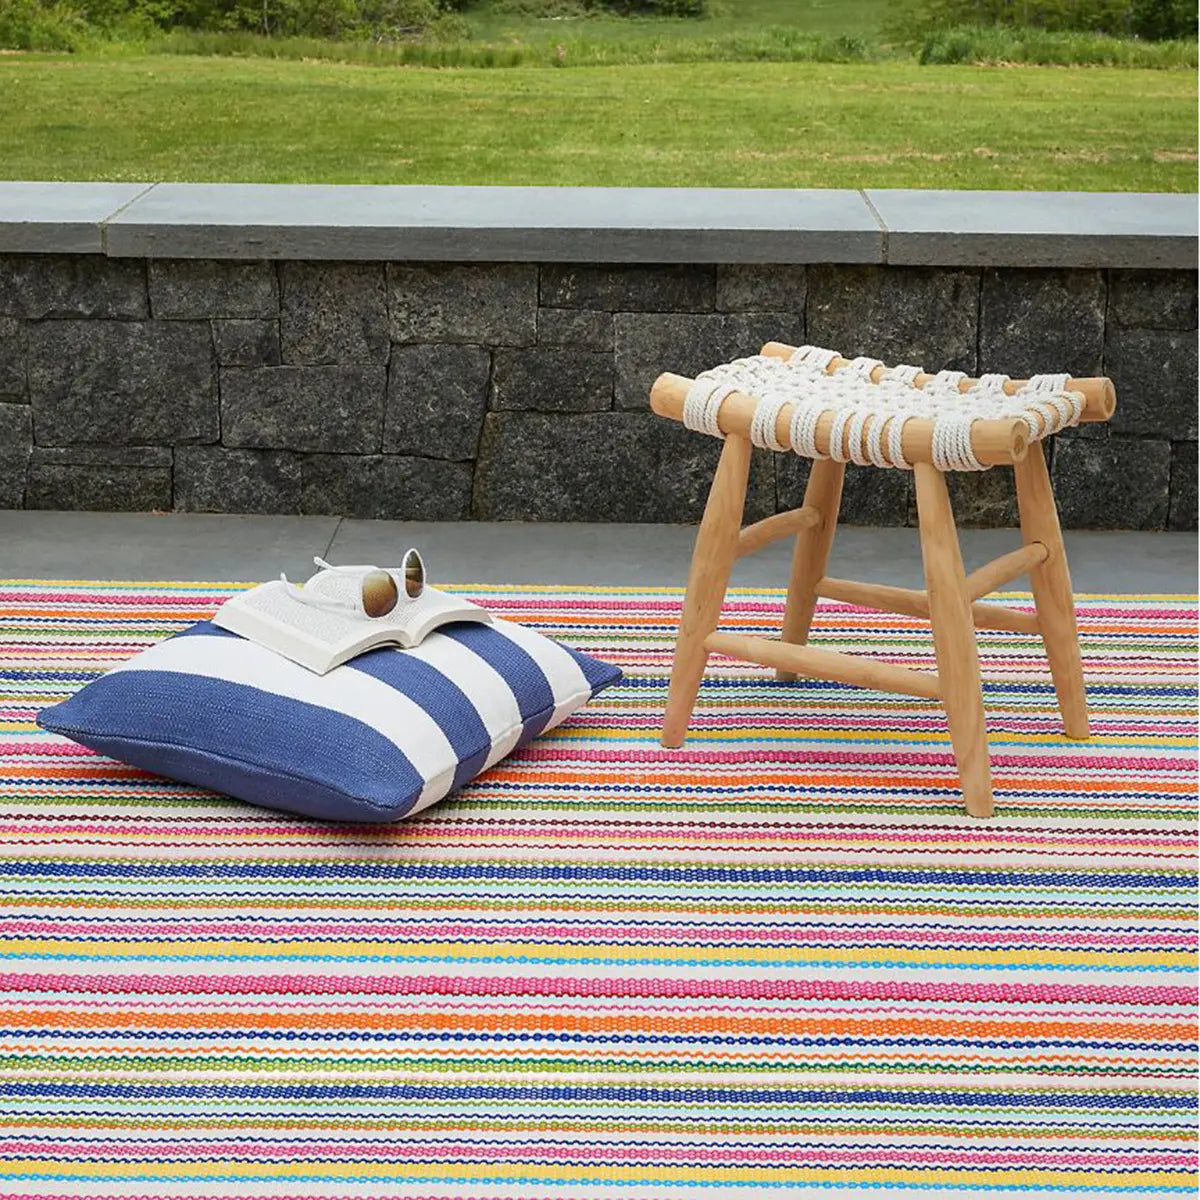 Dash and Albert Summer Stripe Handwoven Indoor Outdoor Rug laid outdoors with a stool, pillow, a book and sunglasses on top